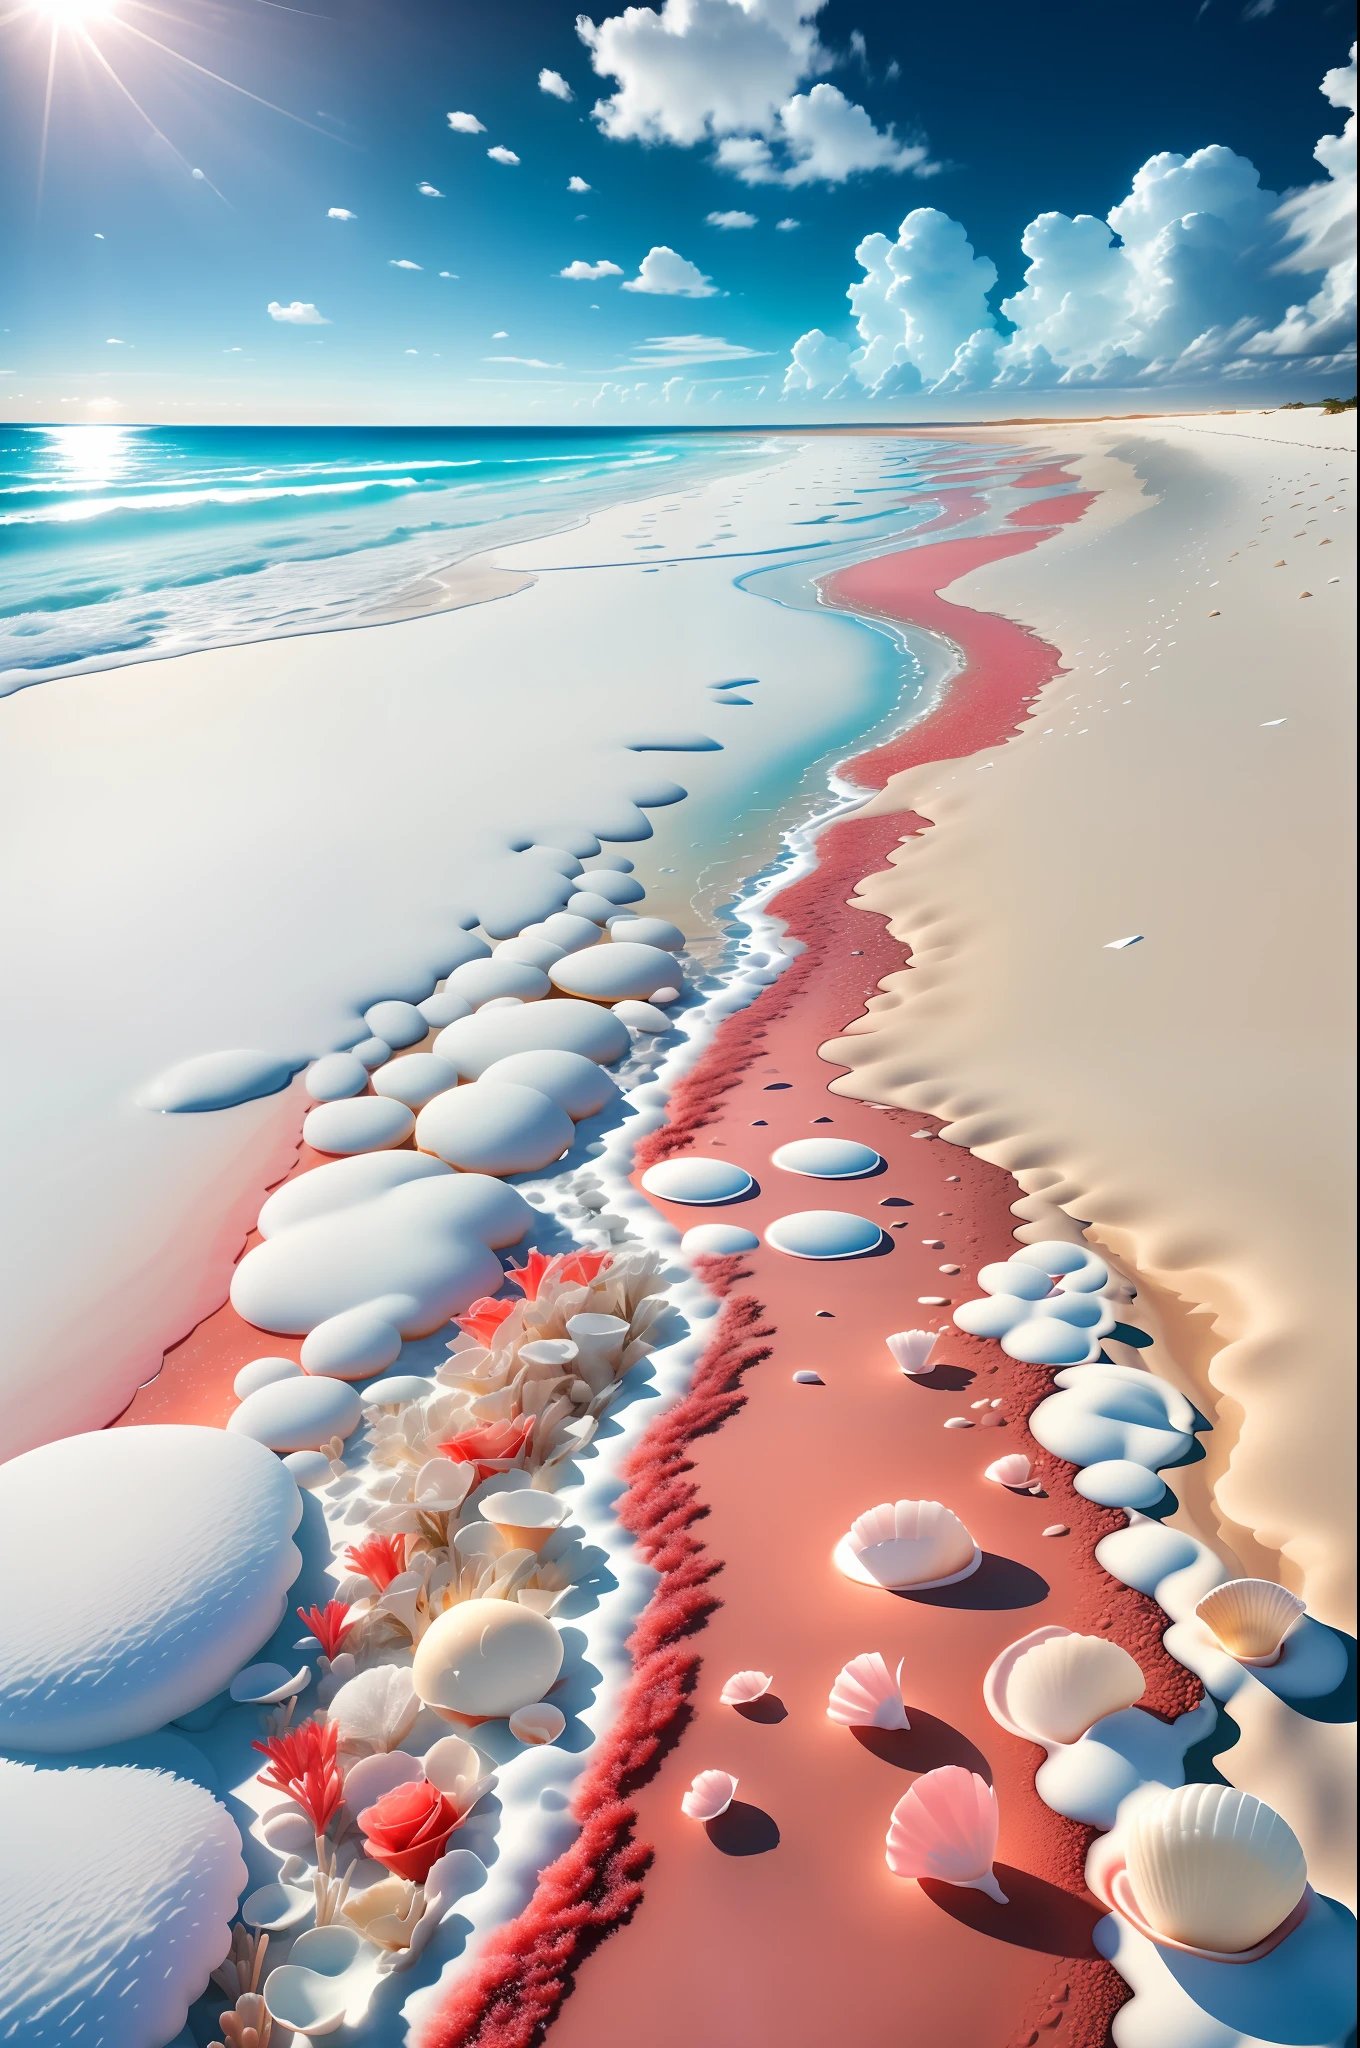 delicate scene,depth of field, 8K, The ivory sky,white clouds,and sunlight shine on the snow-white beach. The coral sea,and many colorful tinny shells on the beach,red roses, roses focus,